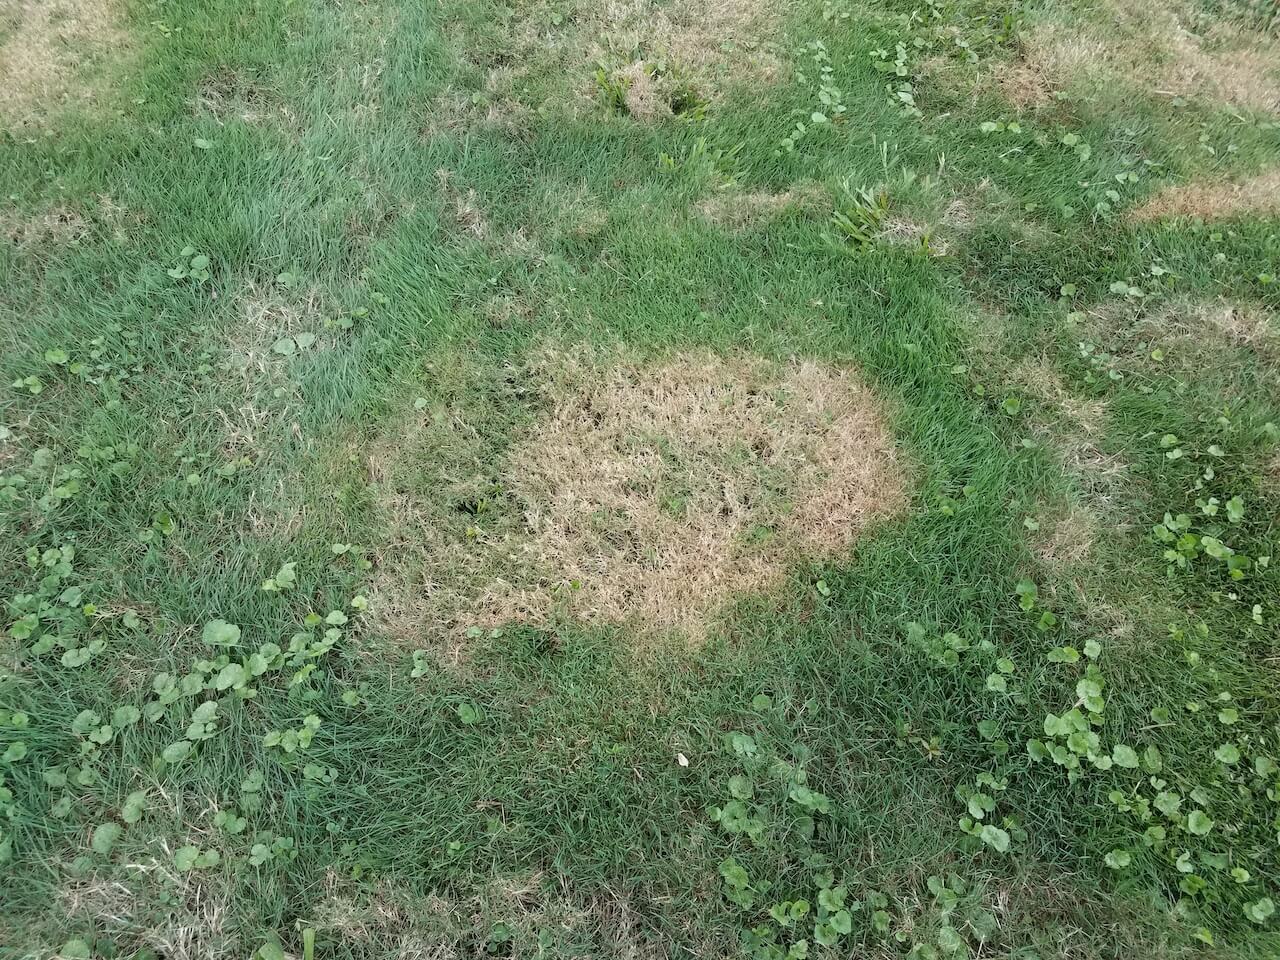 Patchy brown spots on a lawn.